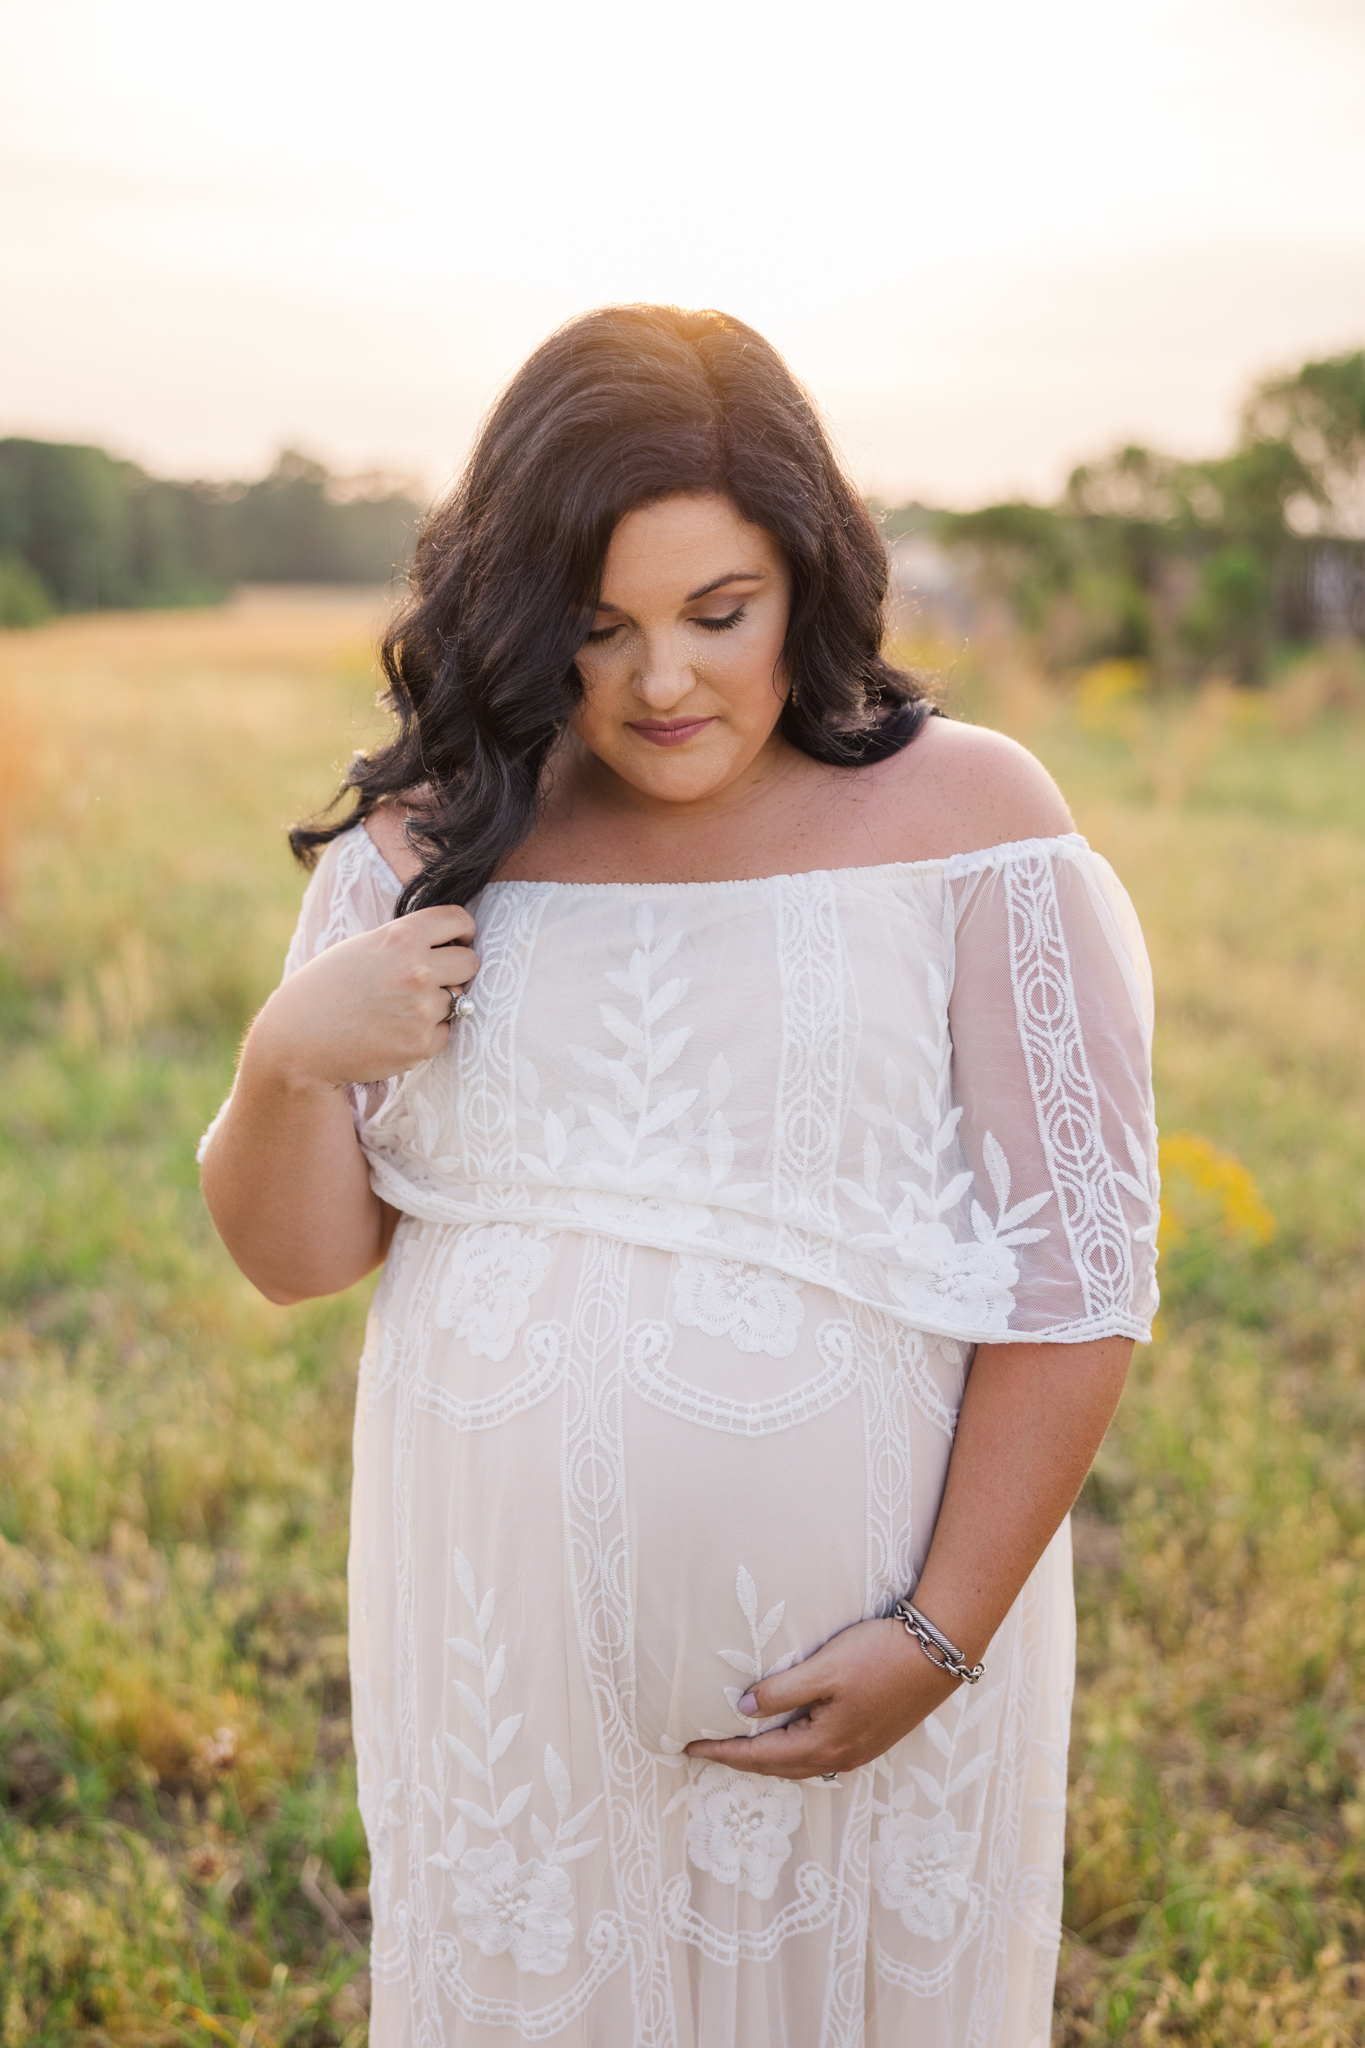 Expecting mom getting maternity photos in Augusta, GA at sunset.